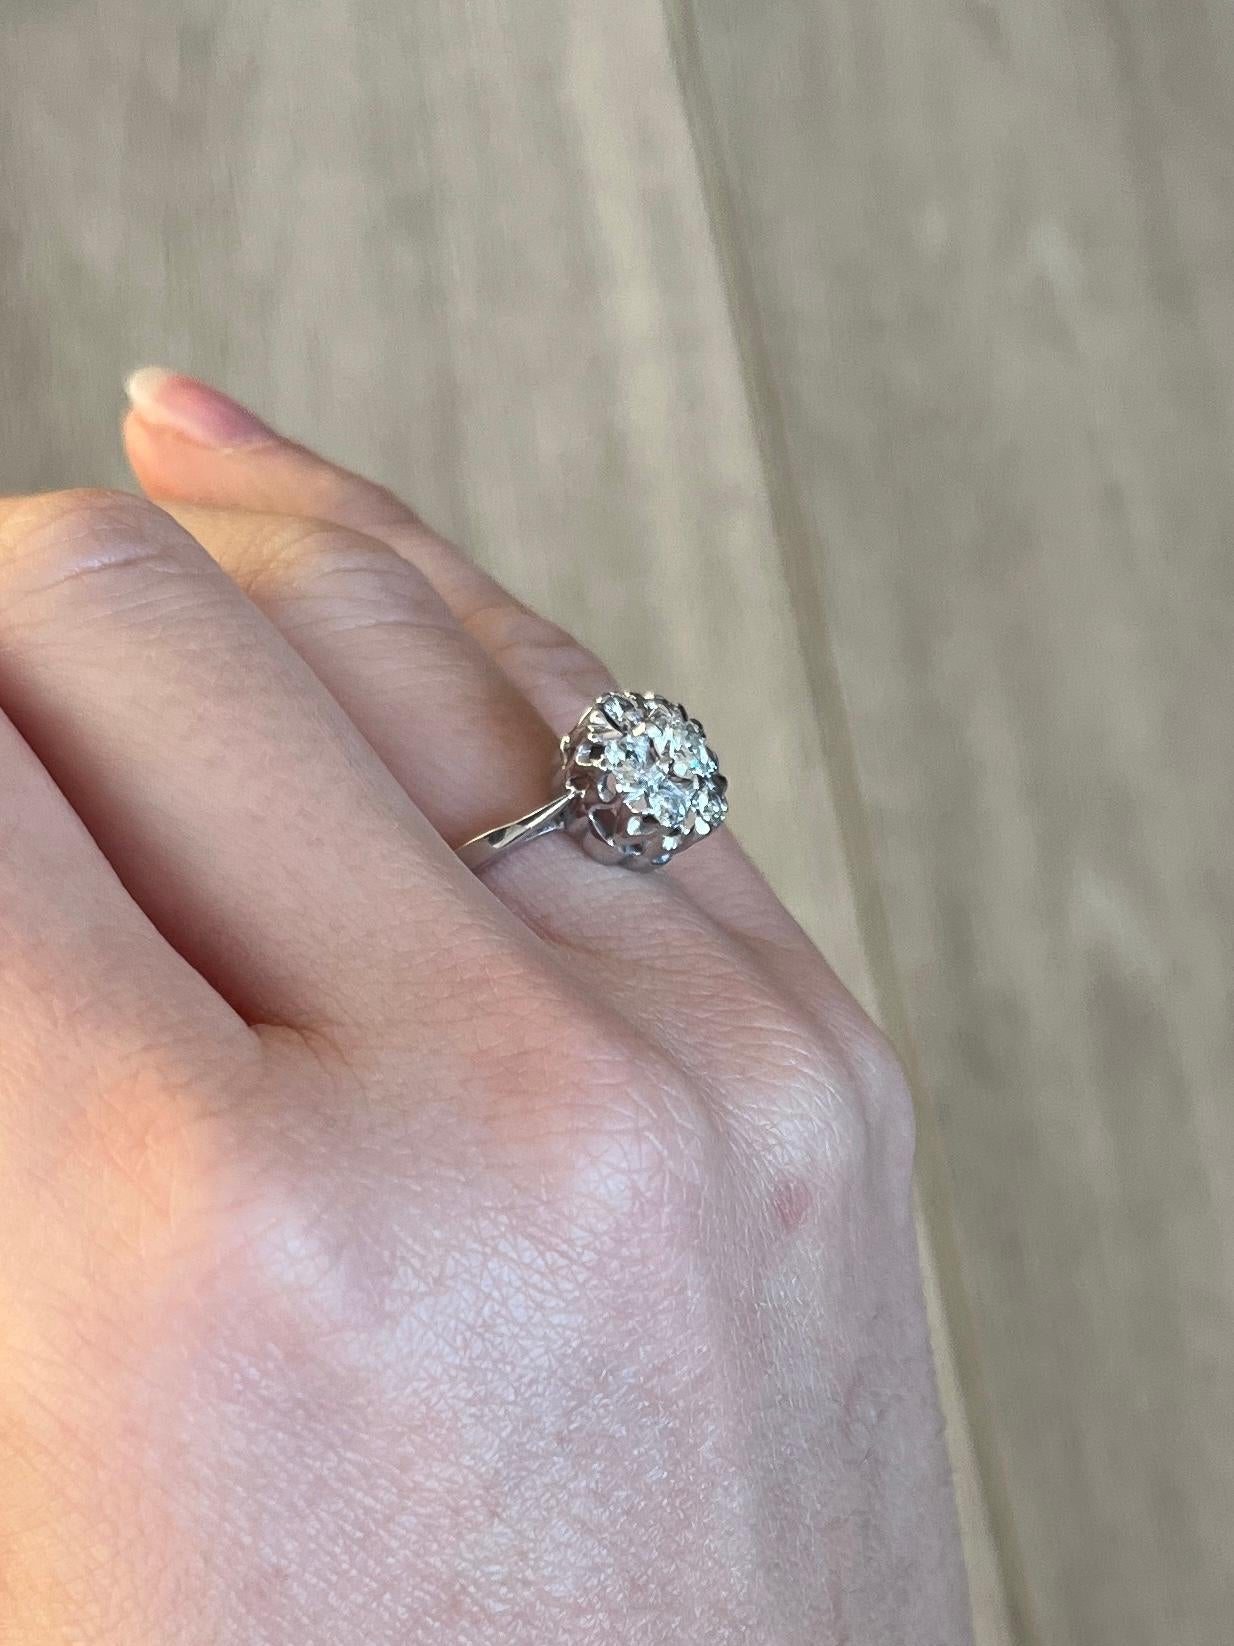 This cluster ring holds Diamonds totalling approx 78pts and are bright and sparkly. The ring is modelled in 18carat white gold. Hallmarked London 1975.

Ring Size: M or 6 1/4
Cluster Diameter: 11mm
Height From Finger: 7mm

Weight: 3.4g